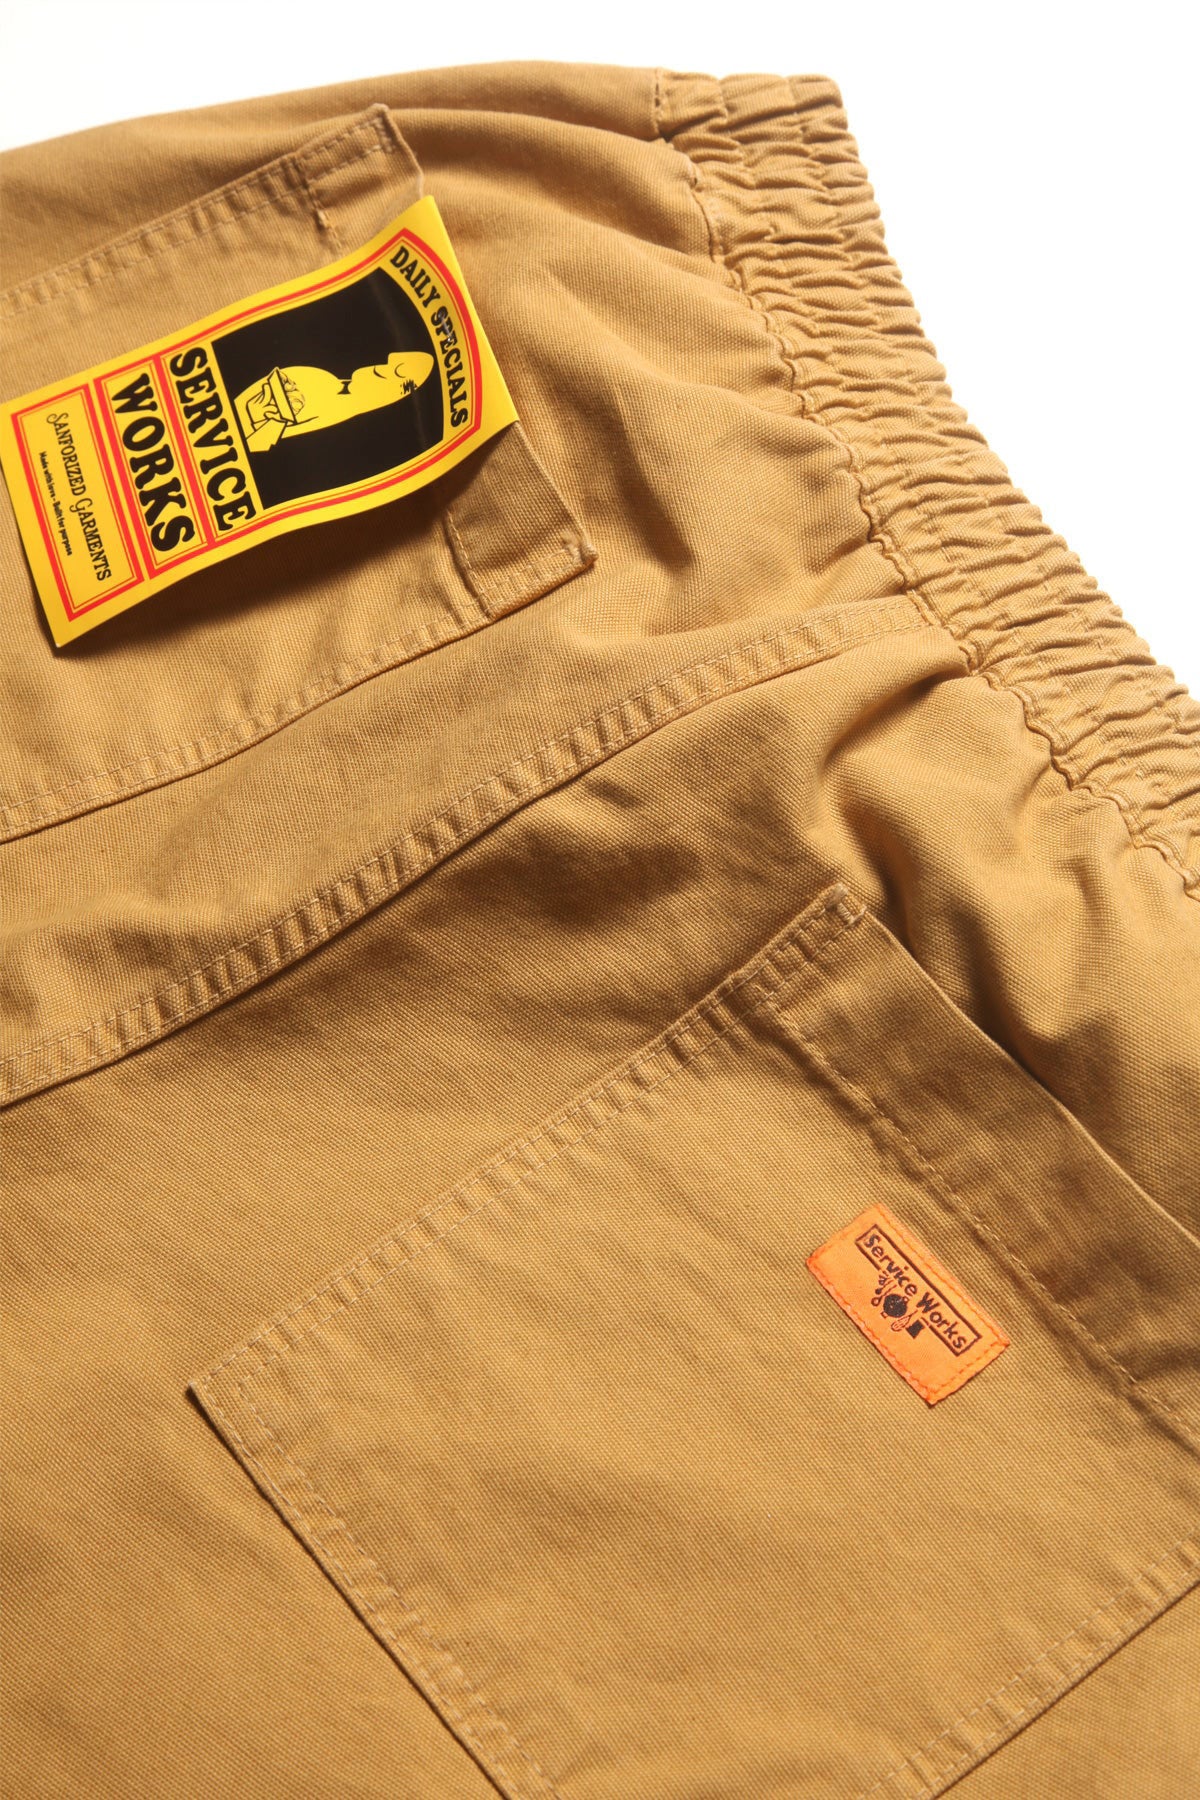 Service Works - Classic Canvas Chef Shorts in Tan